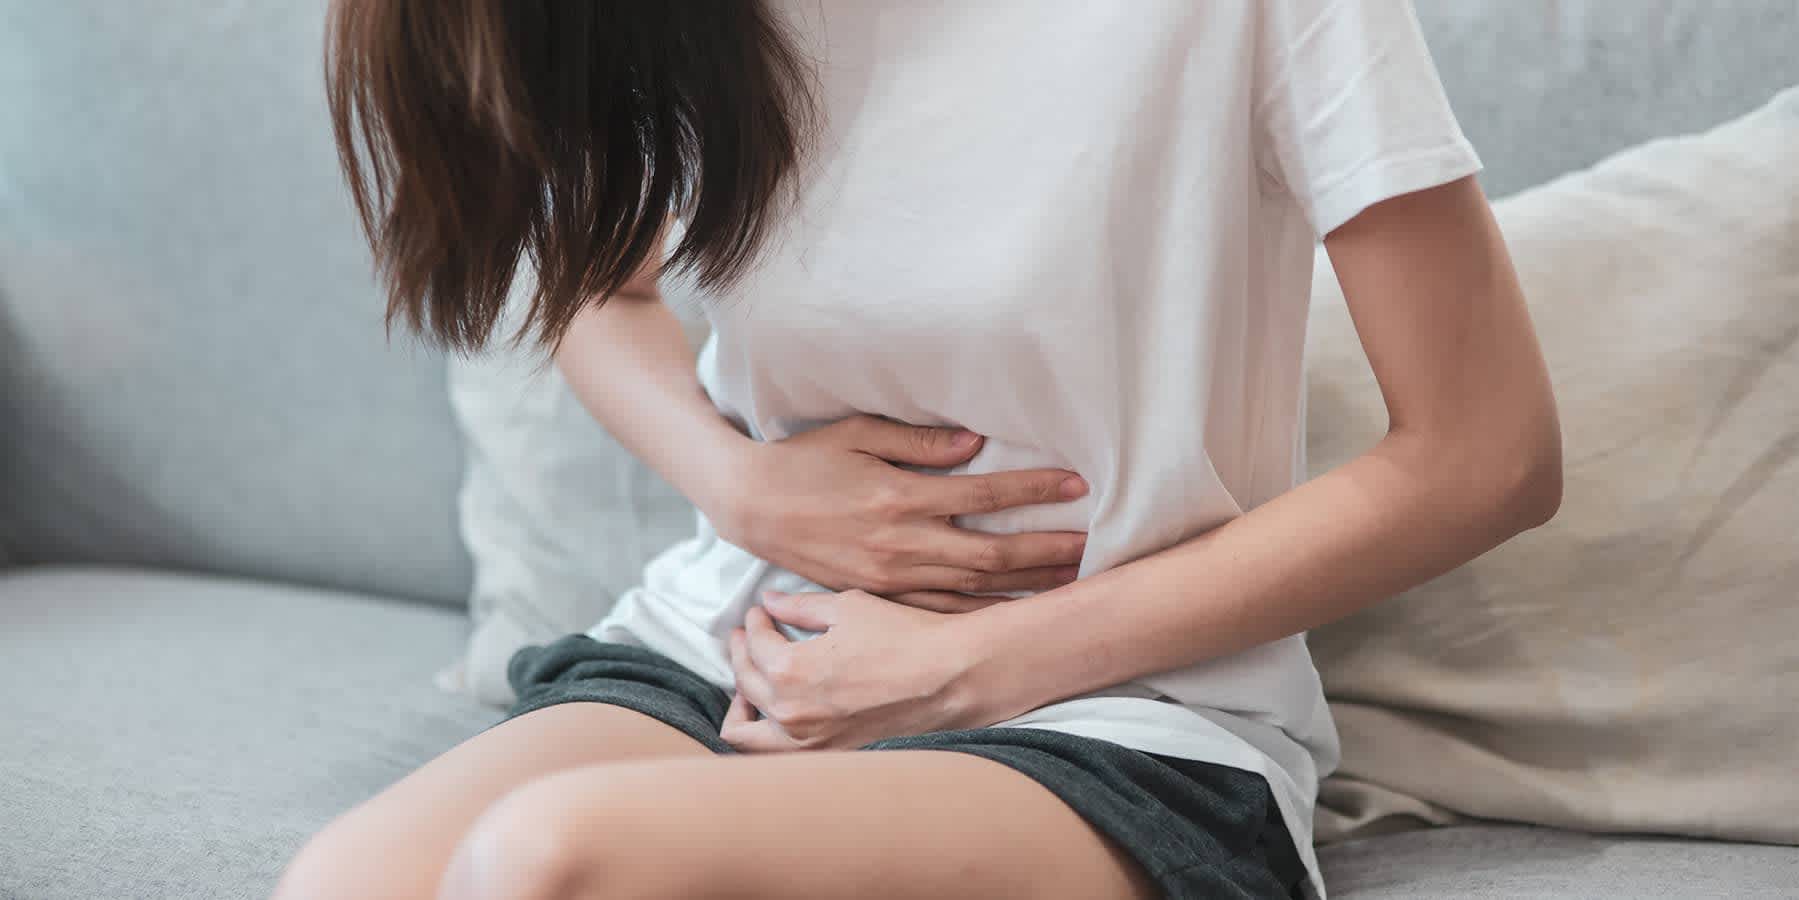 Woman experiencing uncomfortable symptoms from having chlamydia and gonorrhea at the same time